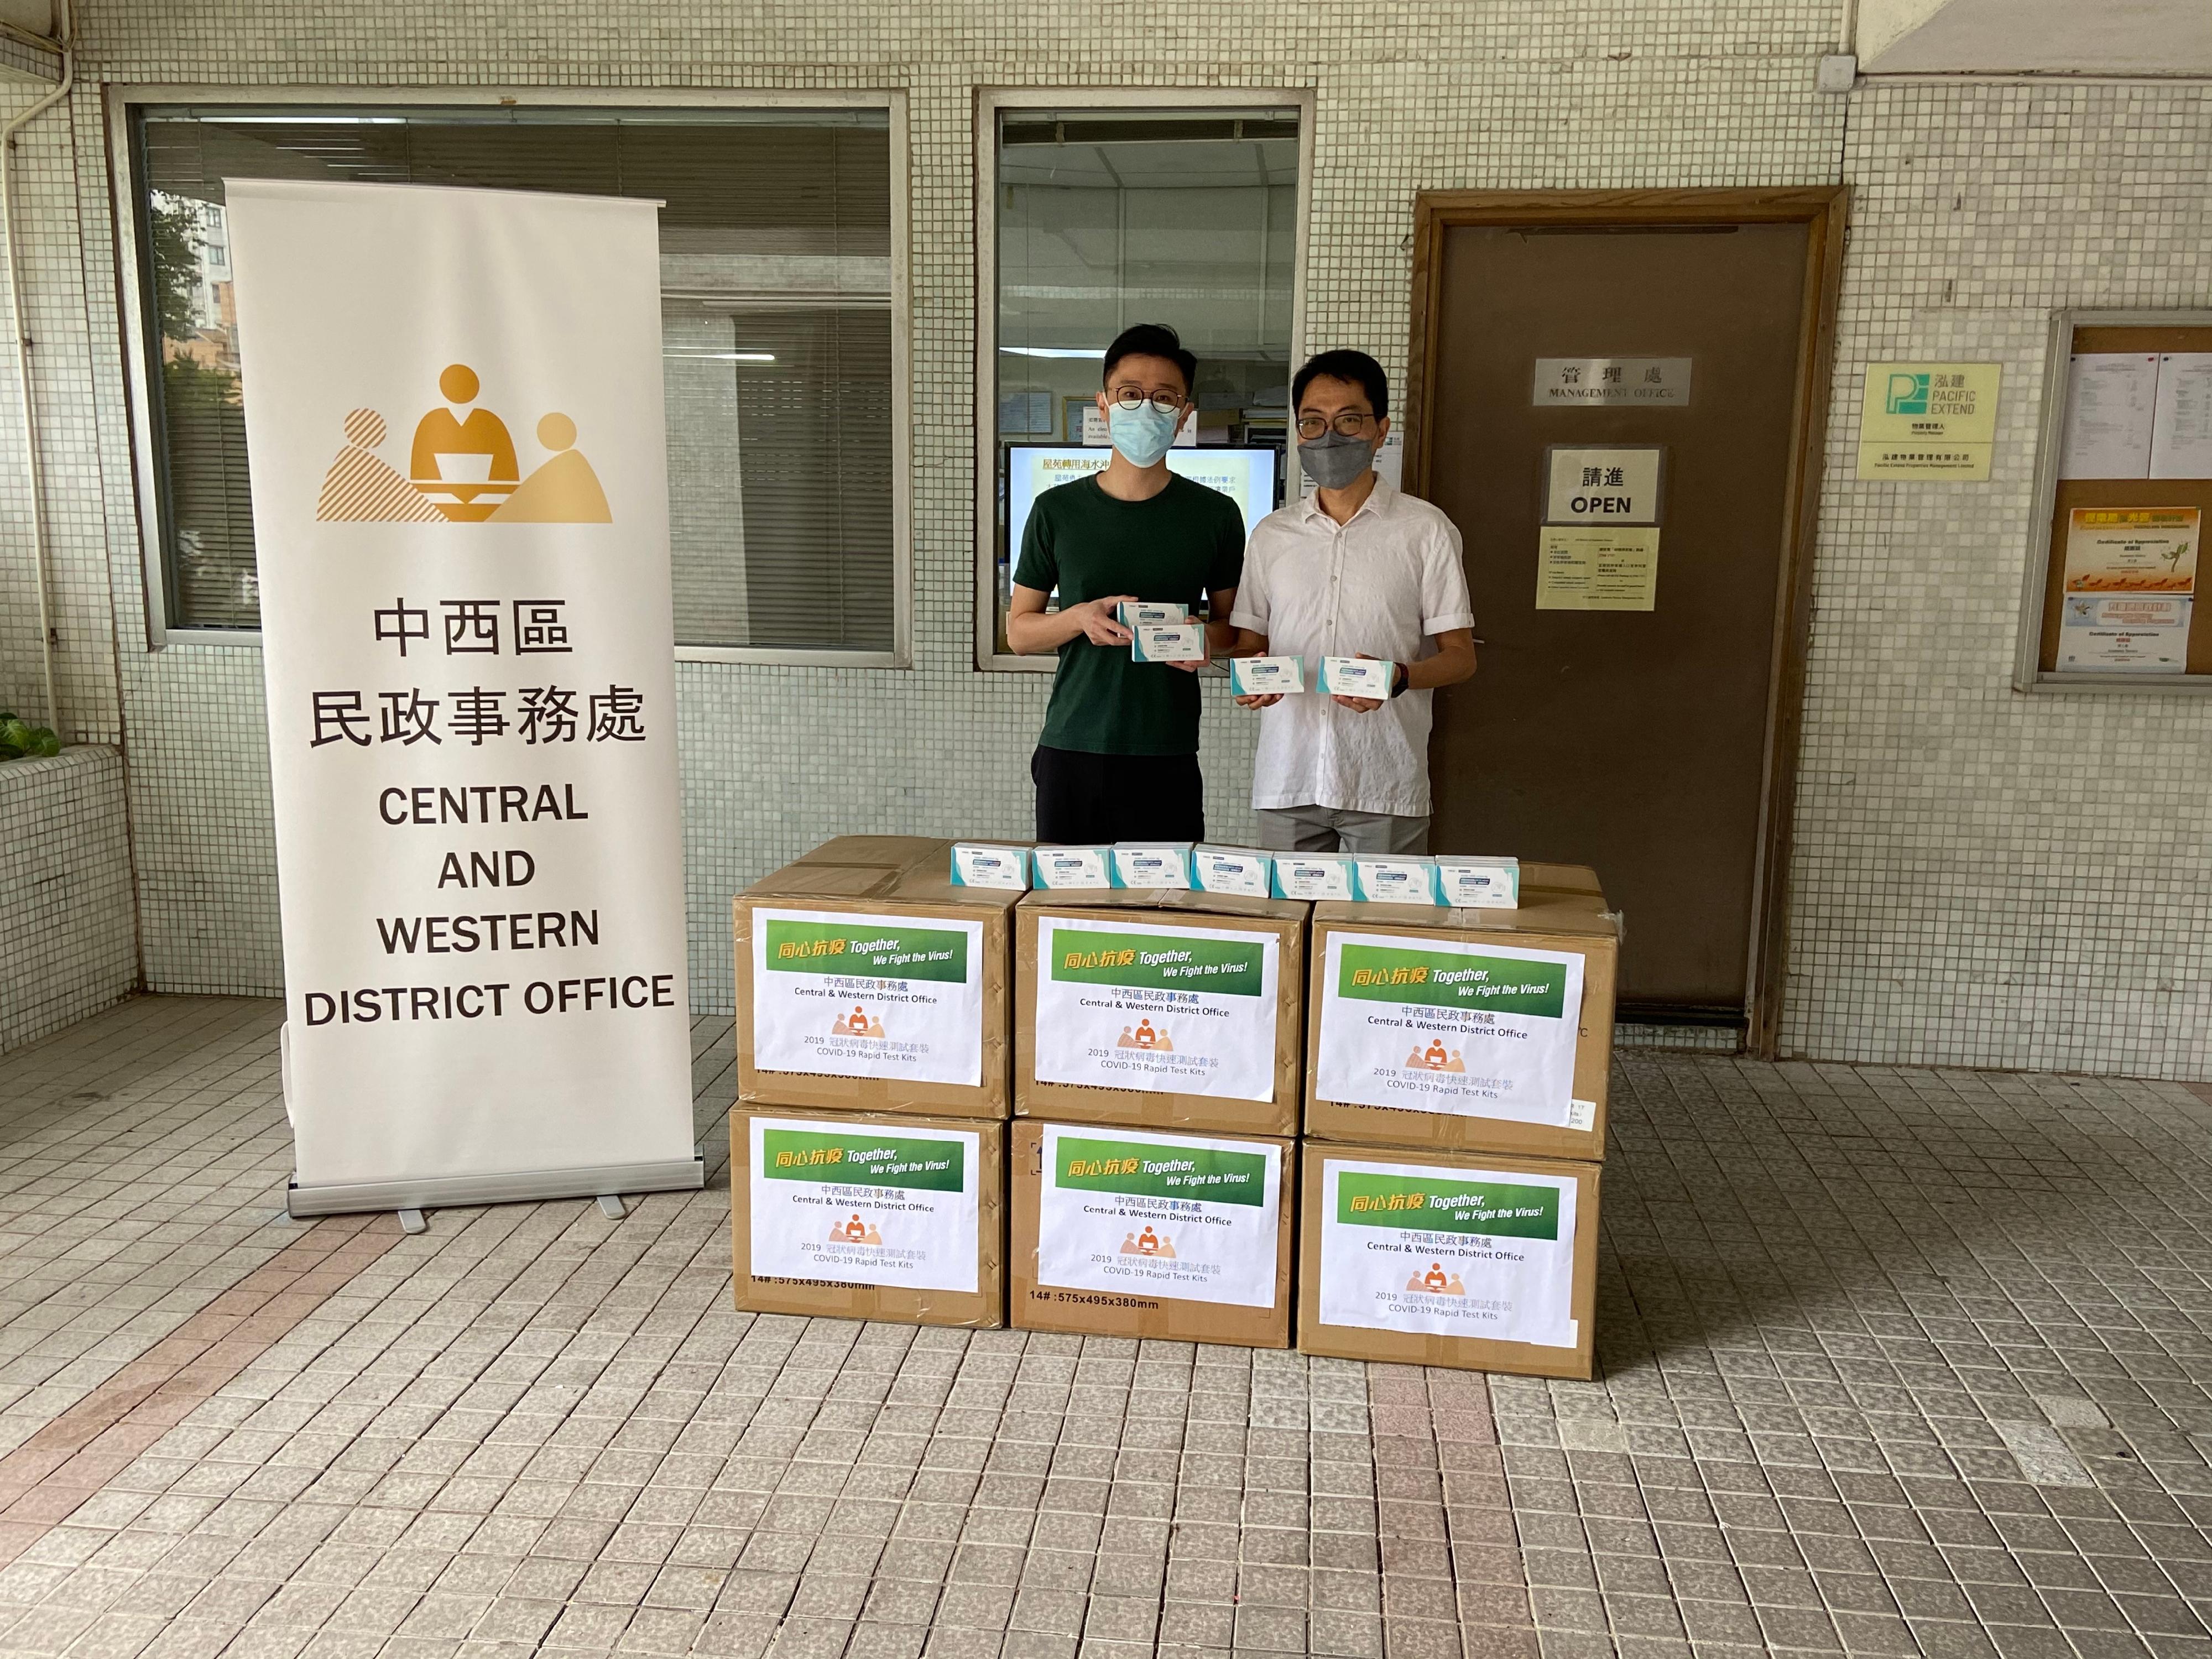 The Central and Western District Office today (May 25) distributed COVID-19 rapid test kits to households, cleansing workers and property management staff living and working in Academic Terrace for voluntary testing through the property management company.